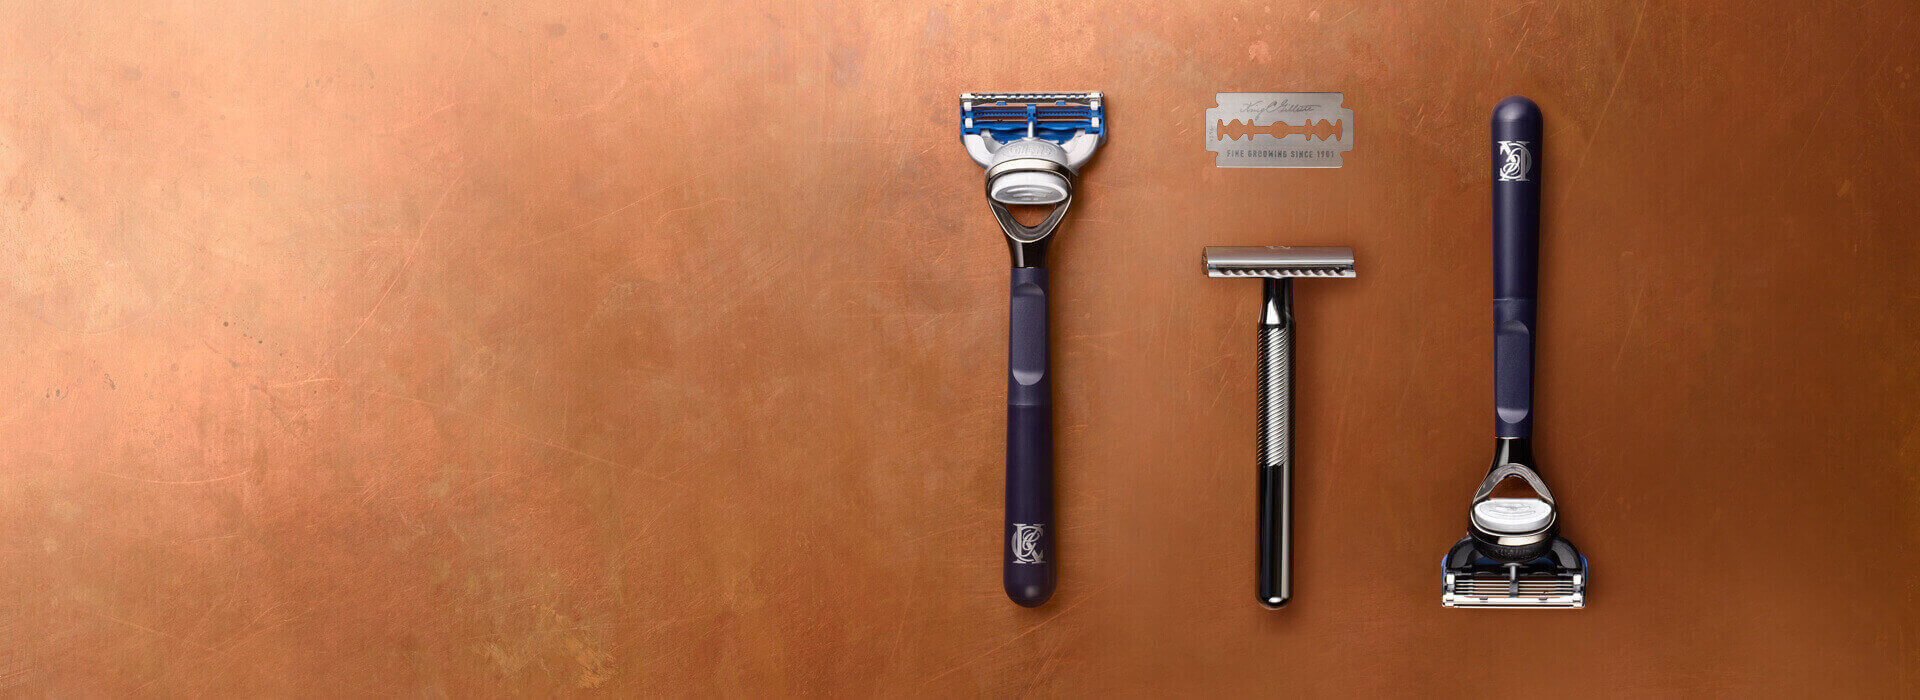 King C. Gillette Razors and Blades